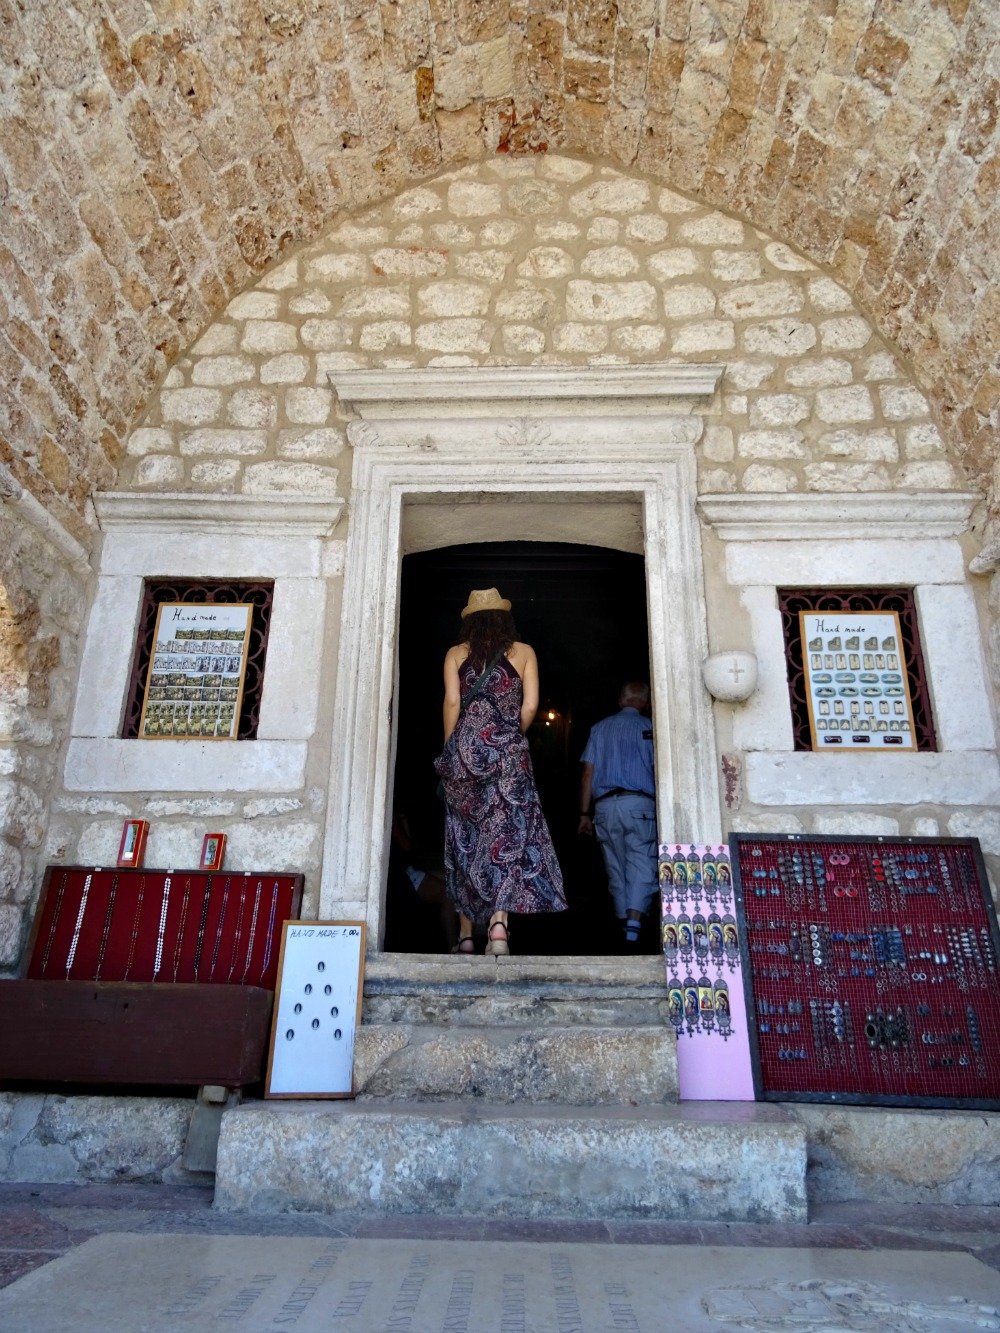 Entering Church of our Lady of Remedy Kotor